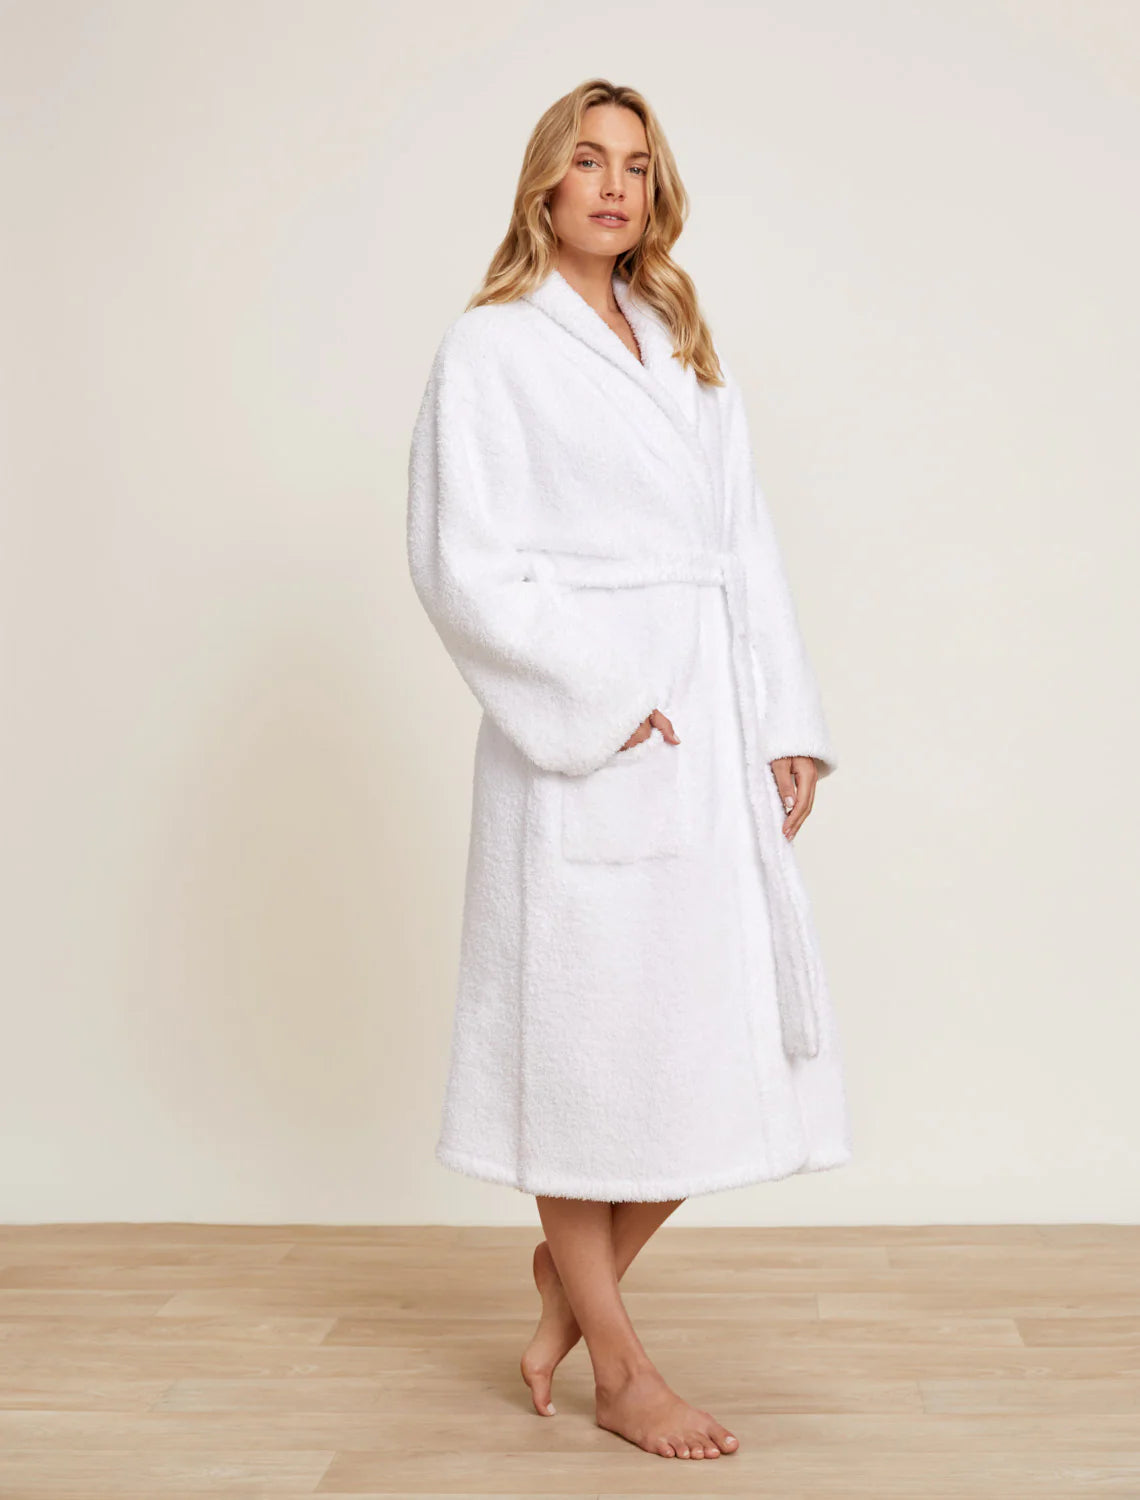 Barefoot Dreams Adult Robe